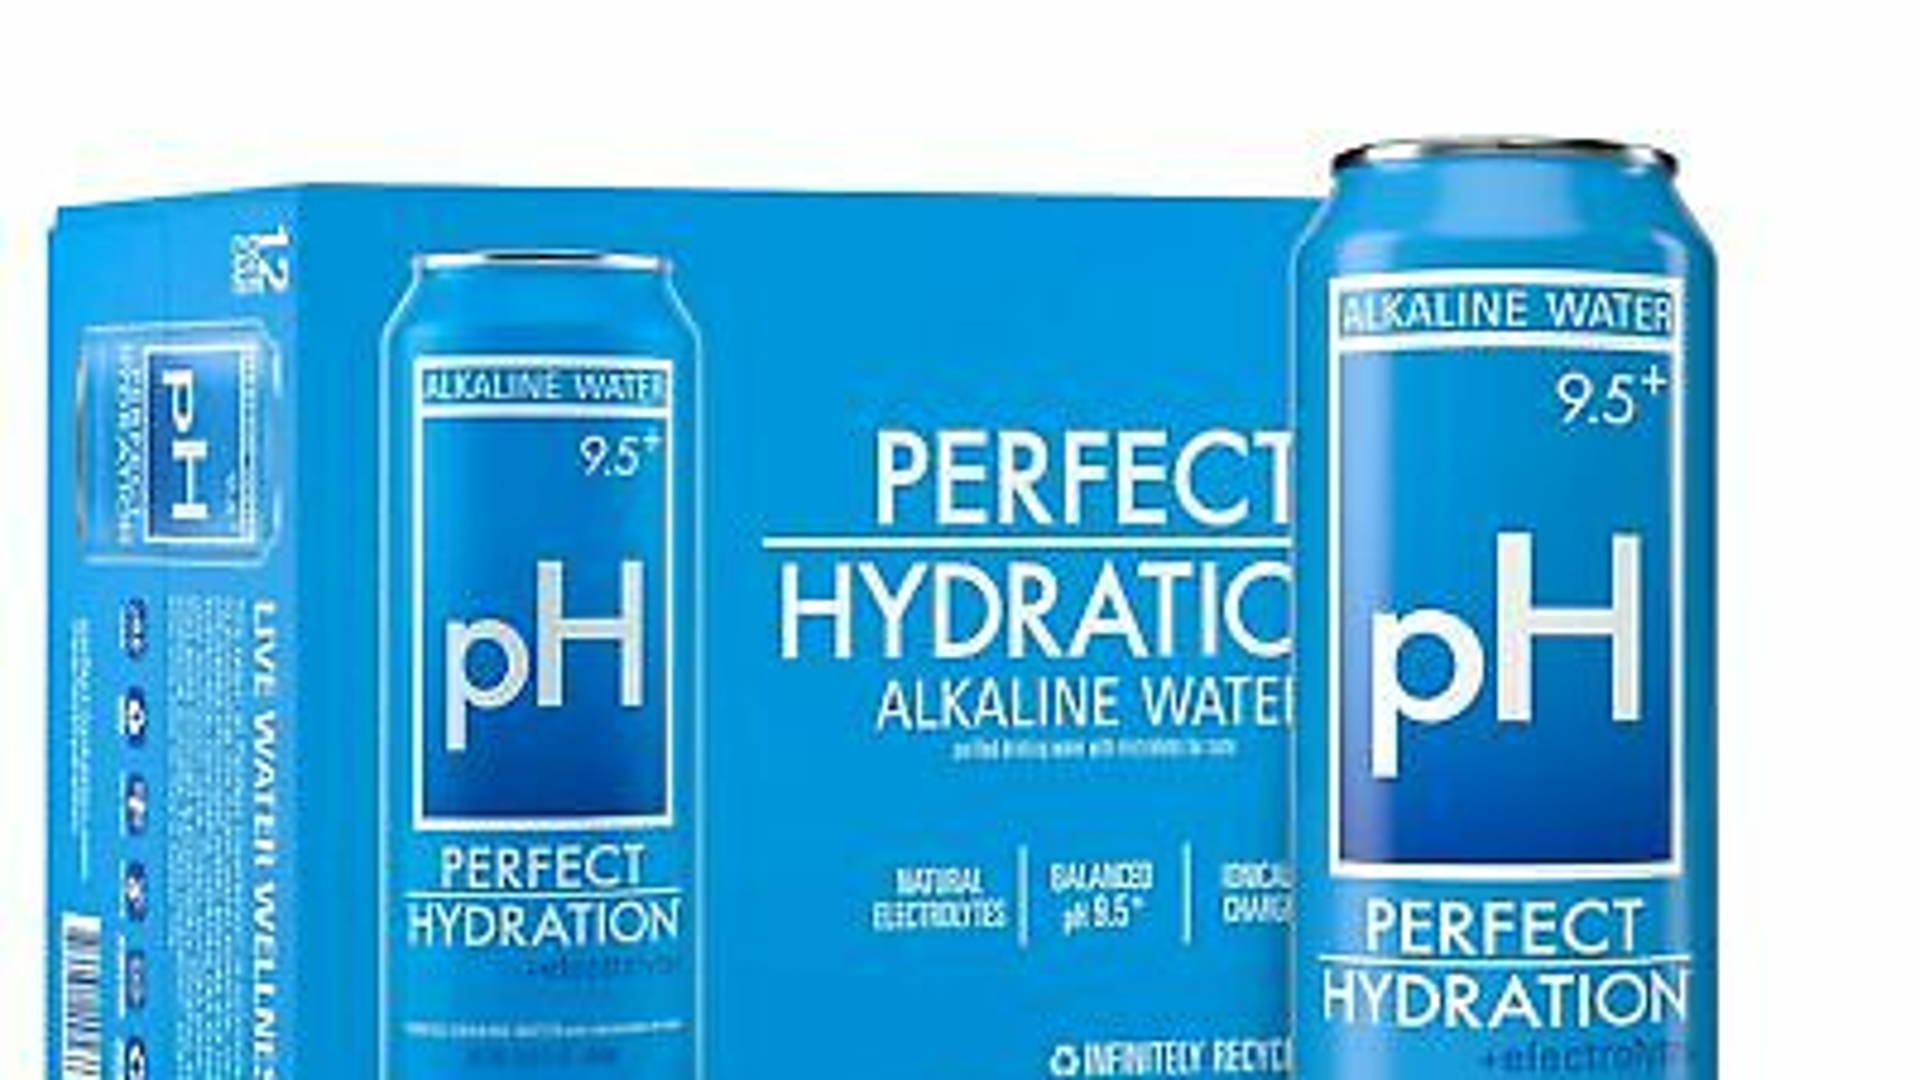 Featured image for Perfect Hydration Announced Infinitely Recyclable Aluminum Cans